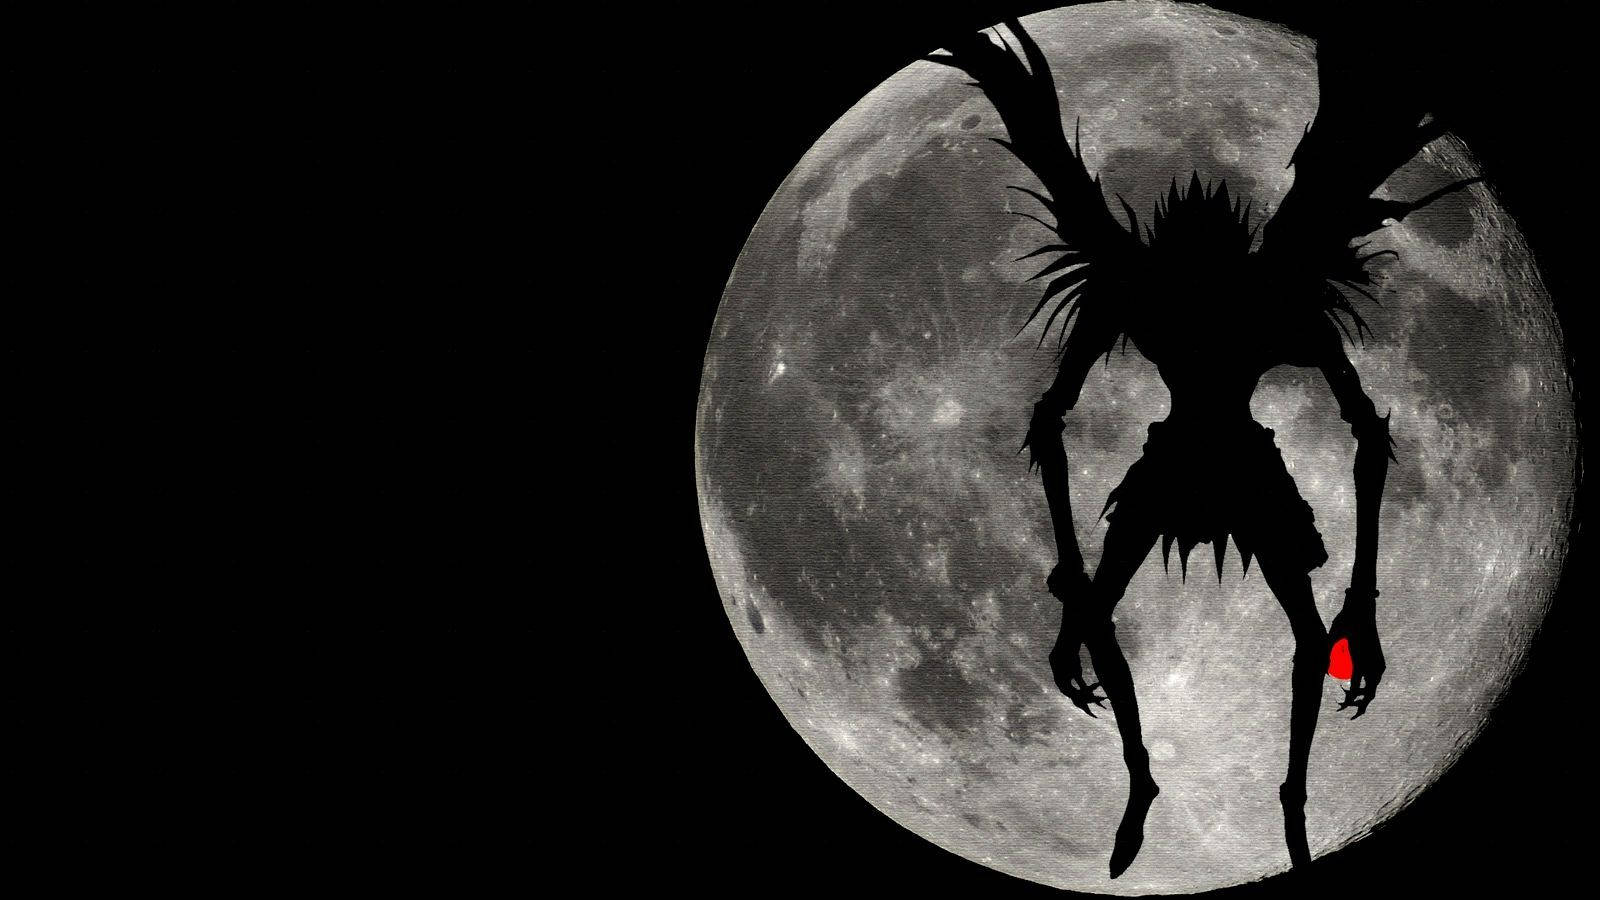 Shinigami Ryuk from the anime series, Death Note Wallpaper